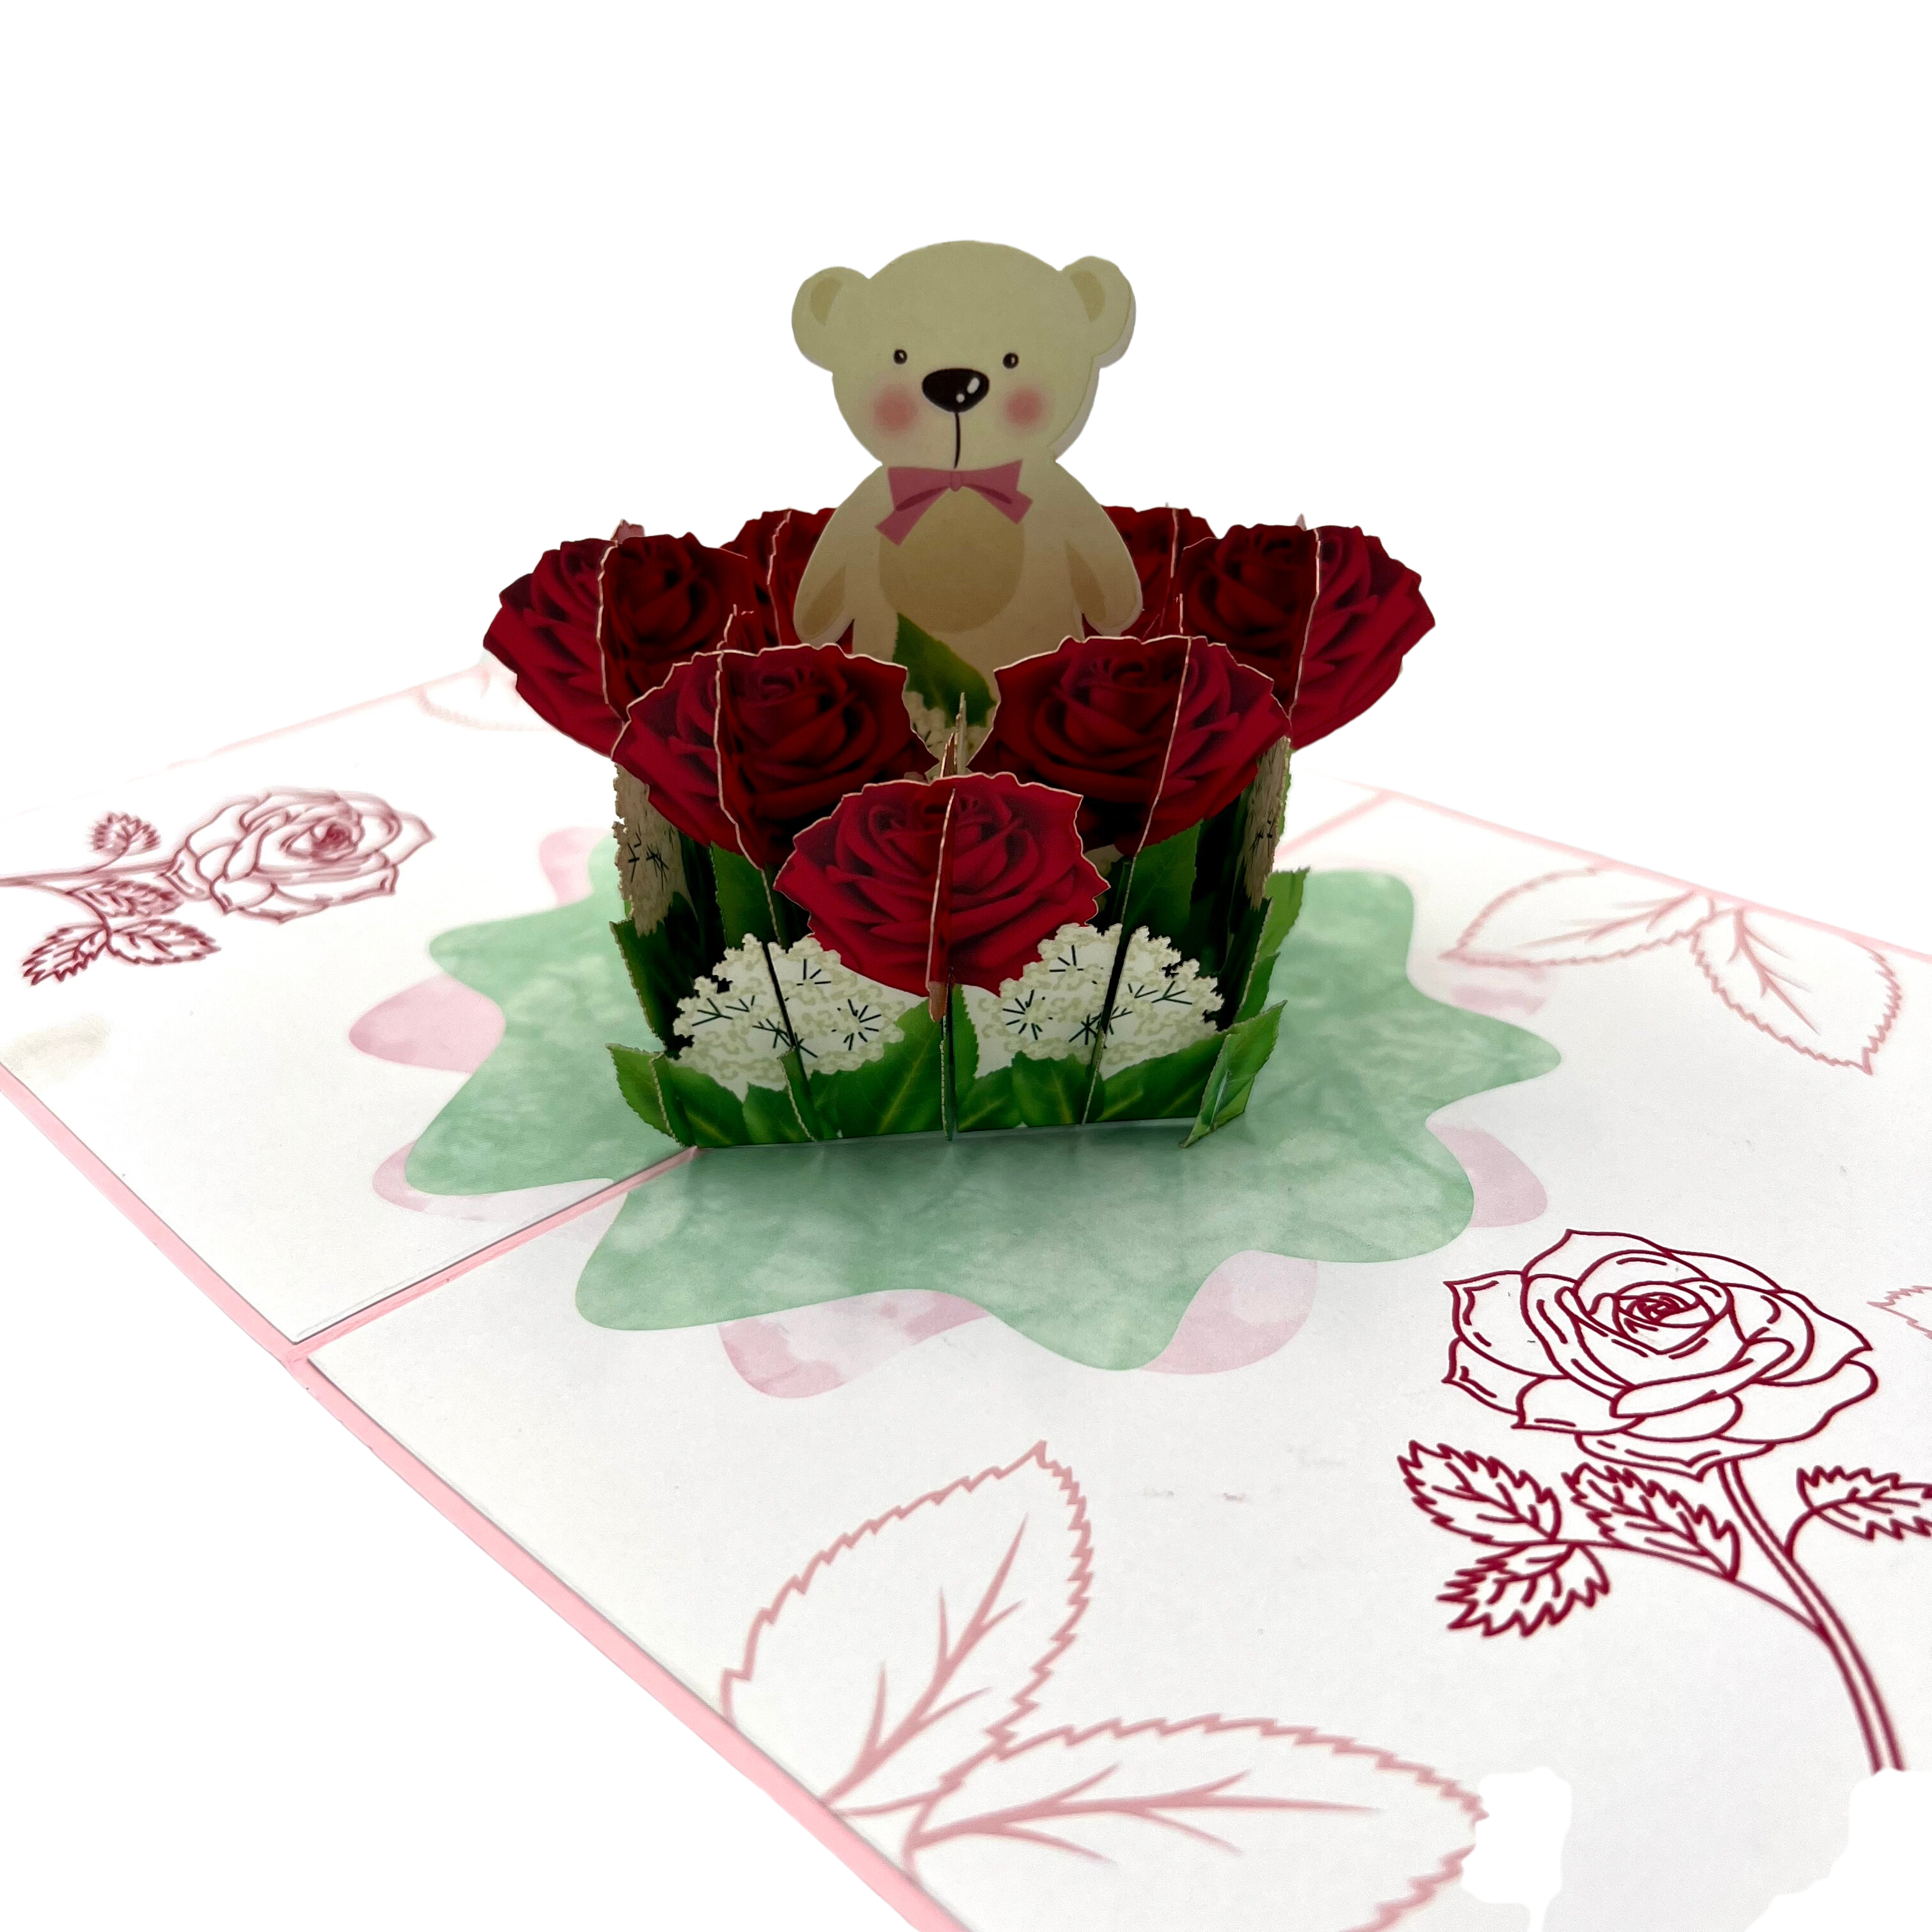 Pop Up Greeting Card Roses Teddy Bear Card, Birthday Card, Gift for Kid, Thank you Card, Animal Gift, Nature Gift, Flower Card, Mothers Day